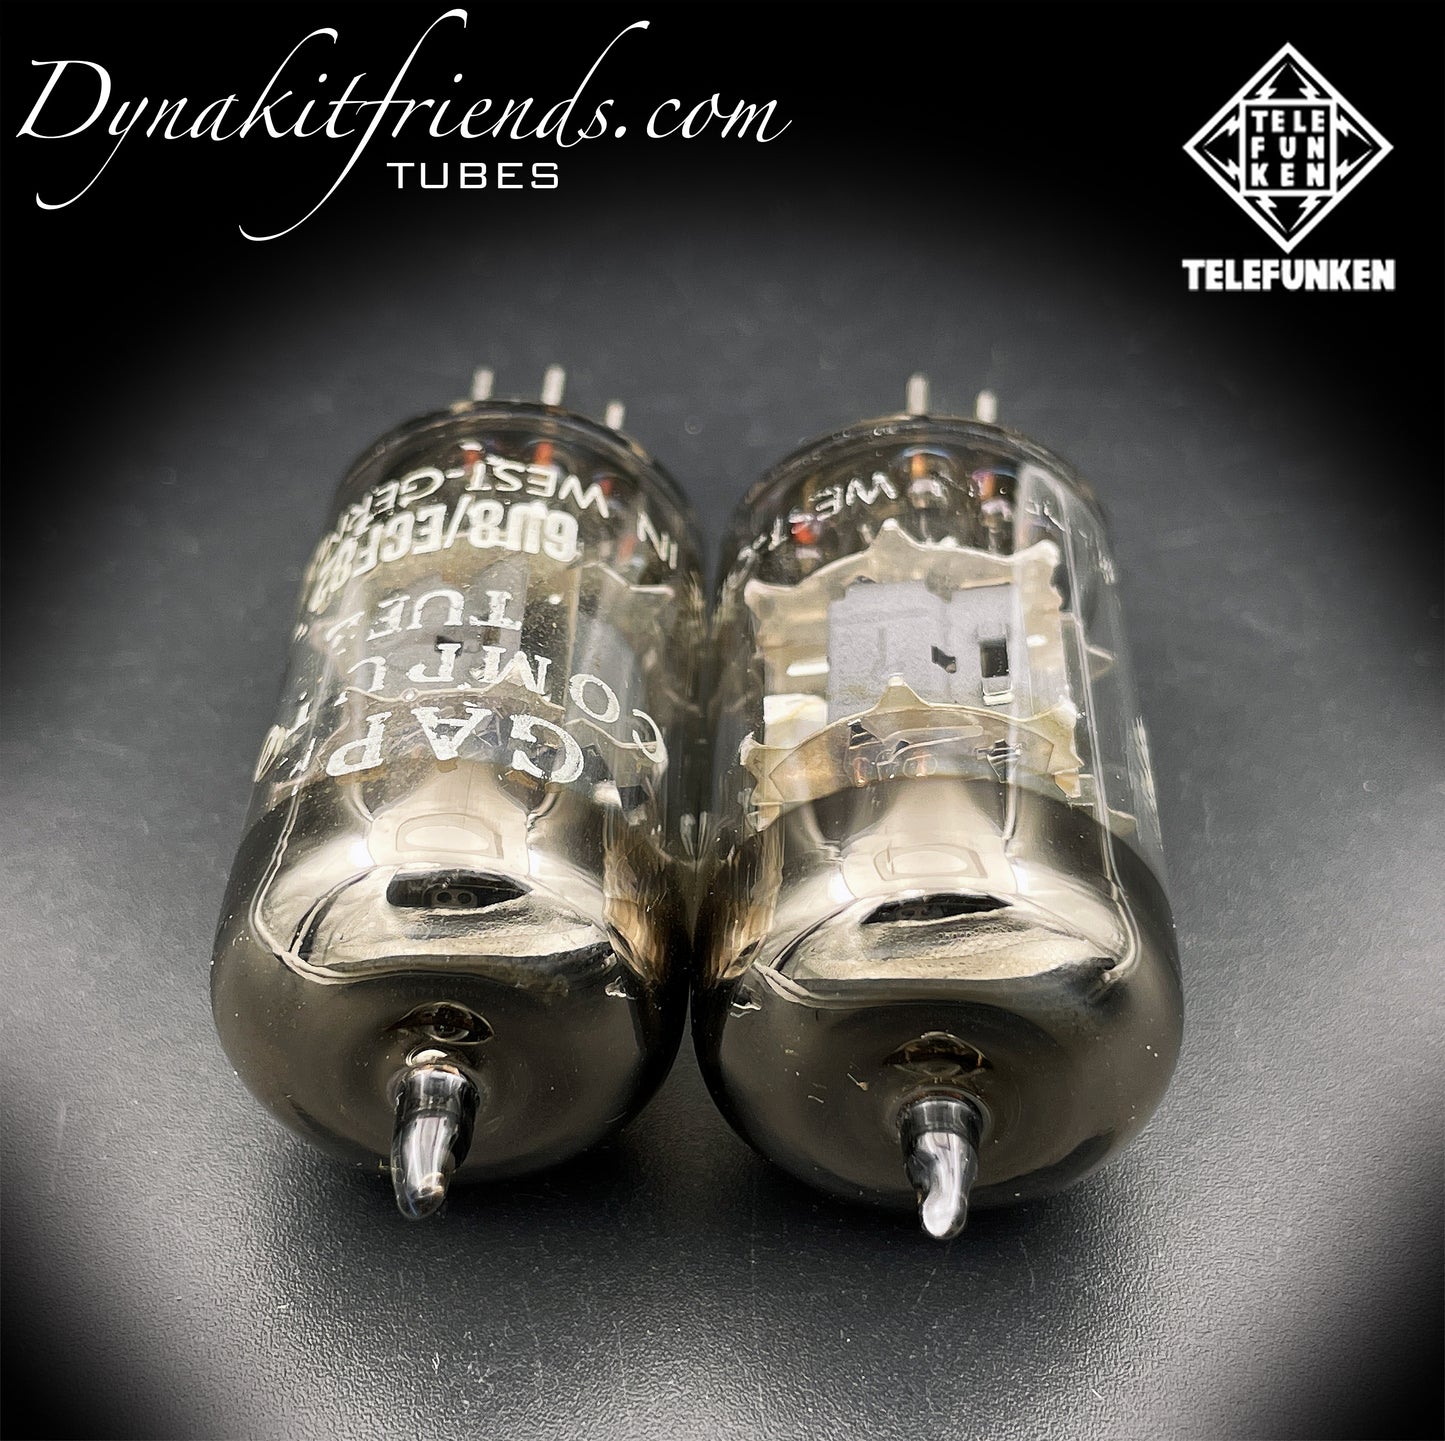 6U8 ( ECF82 ) Telefunken <> Diamond bottom Same Codes Gray Plates Halo Getter Matched Tubes Made in Germany